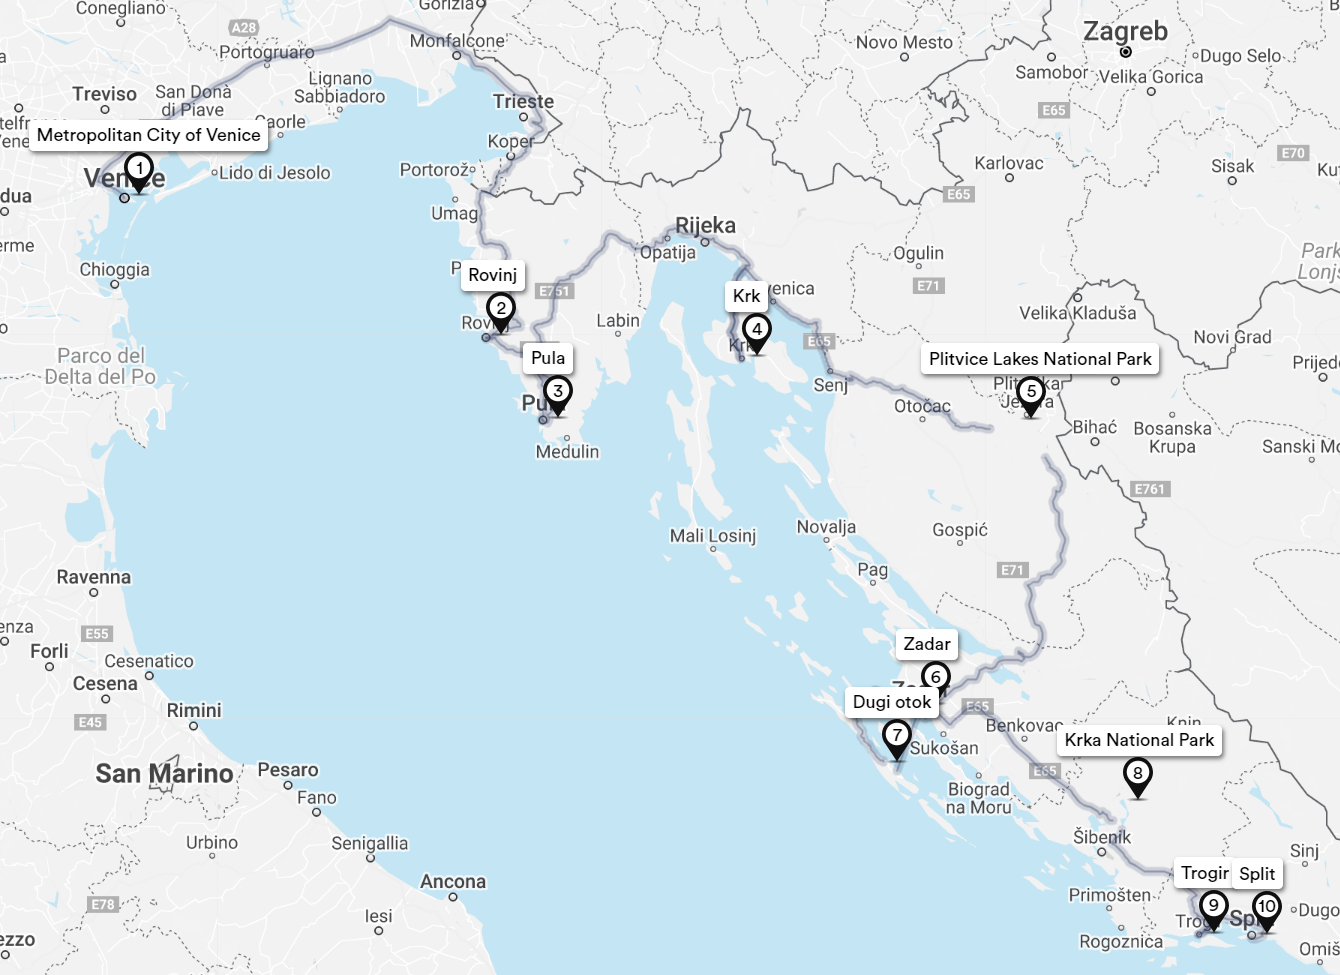 balkans and croatia itinerary where to visit things to do